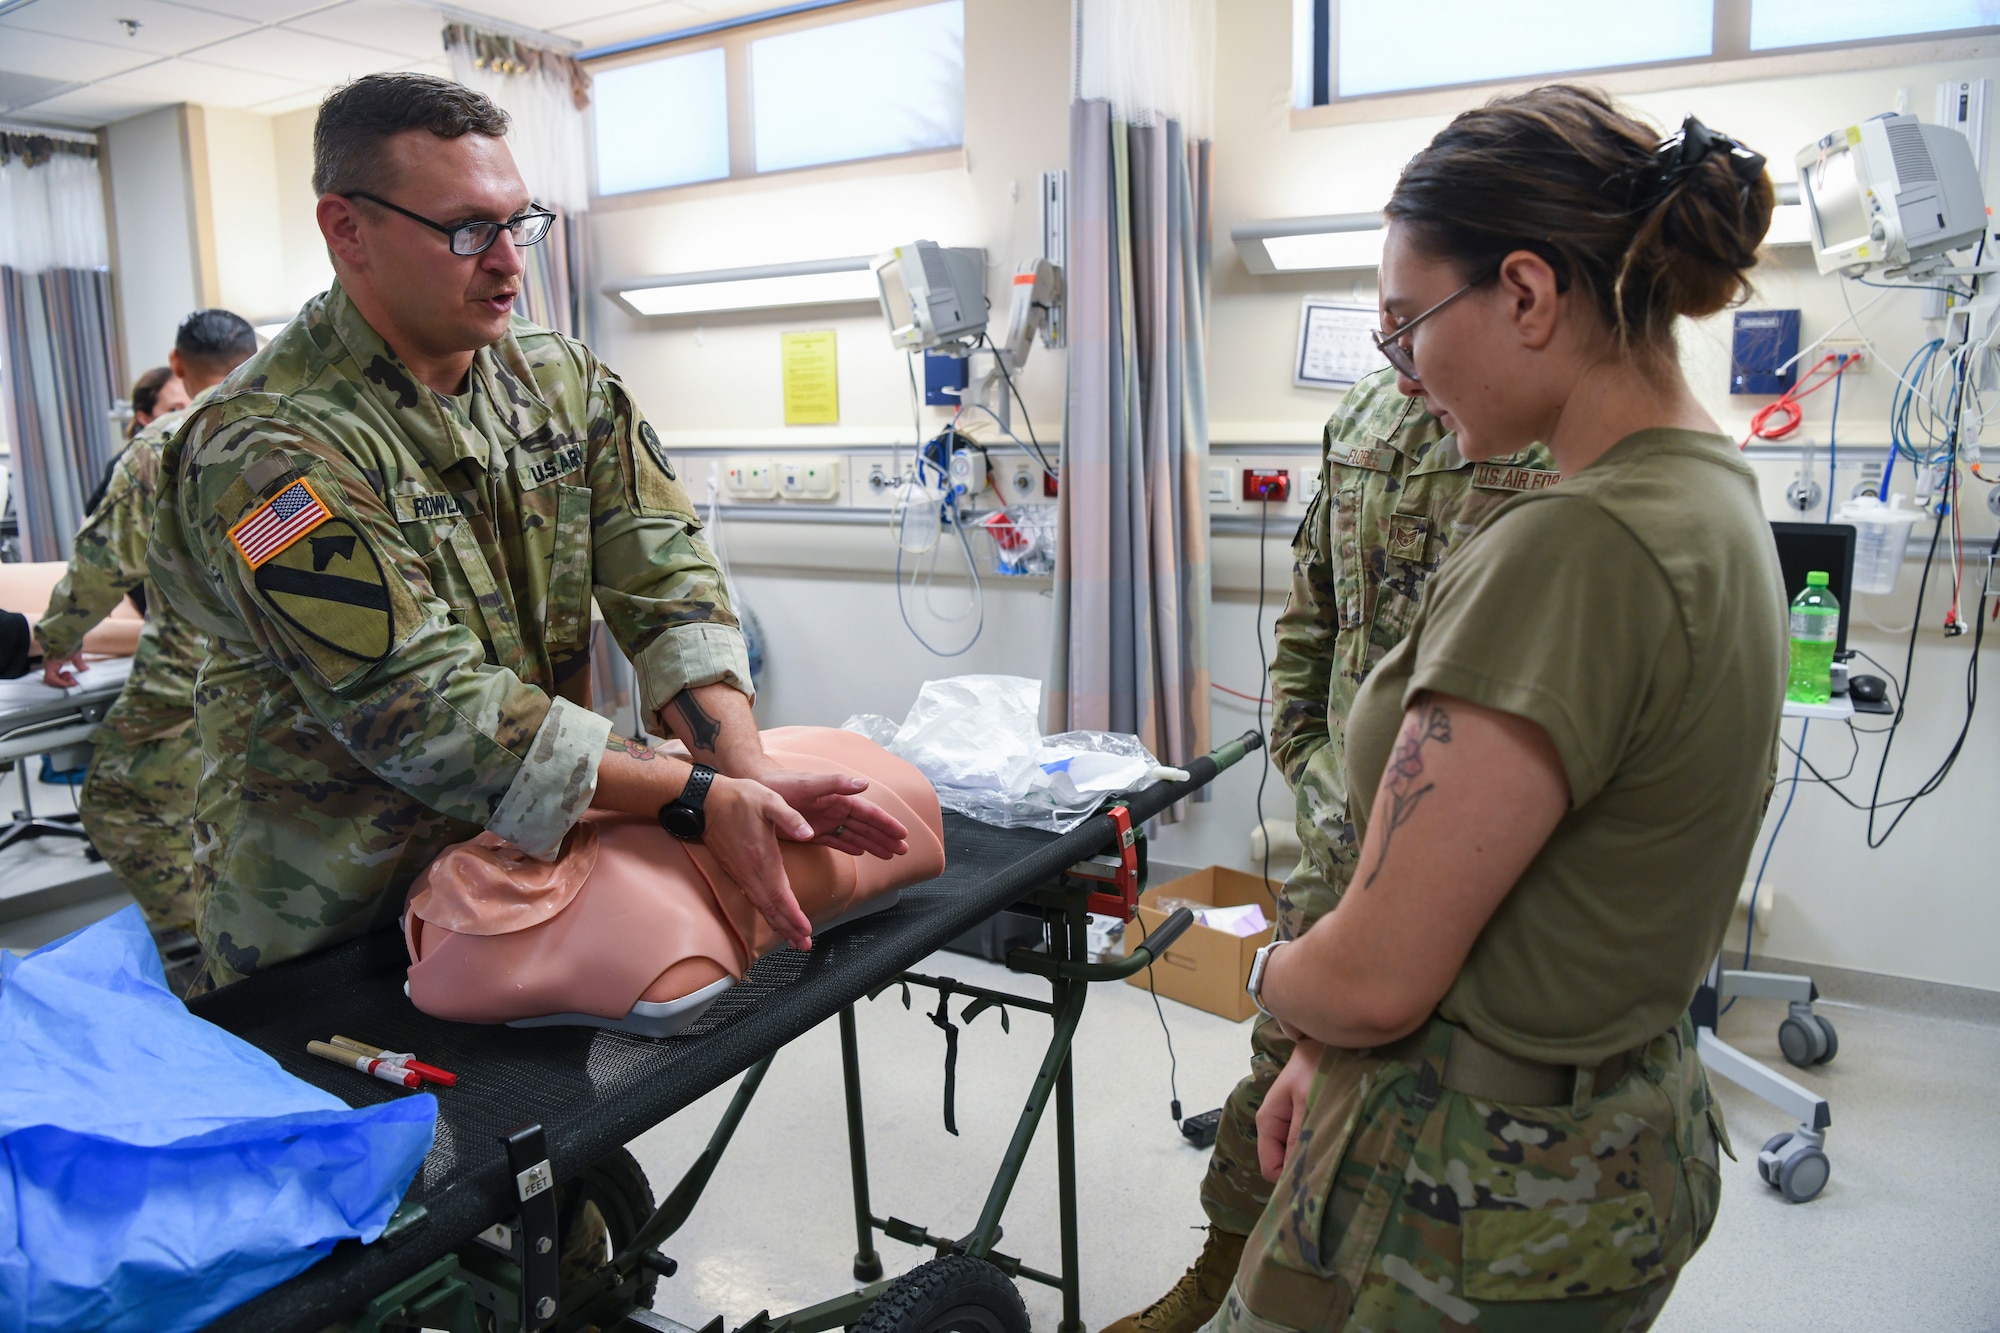 U.S. Army Sgt. 1st Class Bryan Rowland, U.S. Army Medical Department Activity Bavaria NCOIC of education and training, left, teaches A1C Justice Nerad, 31st Health Care Operations Squadron aerospace medical technician, right, how to treat a collapsed lung using a training mannequin